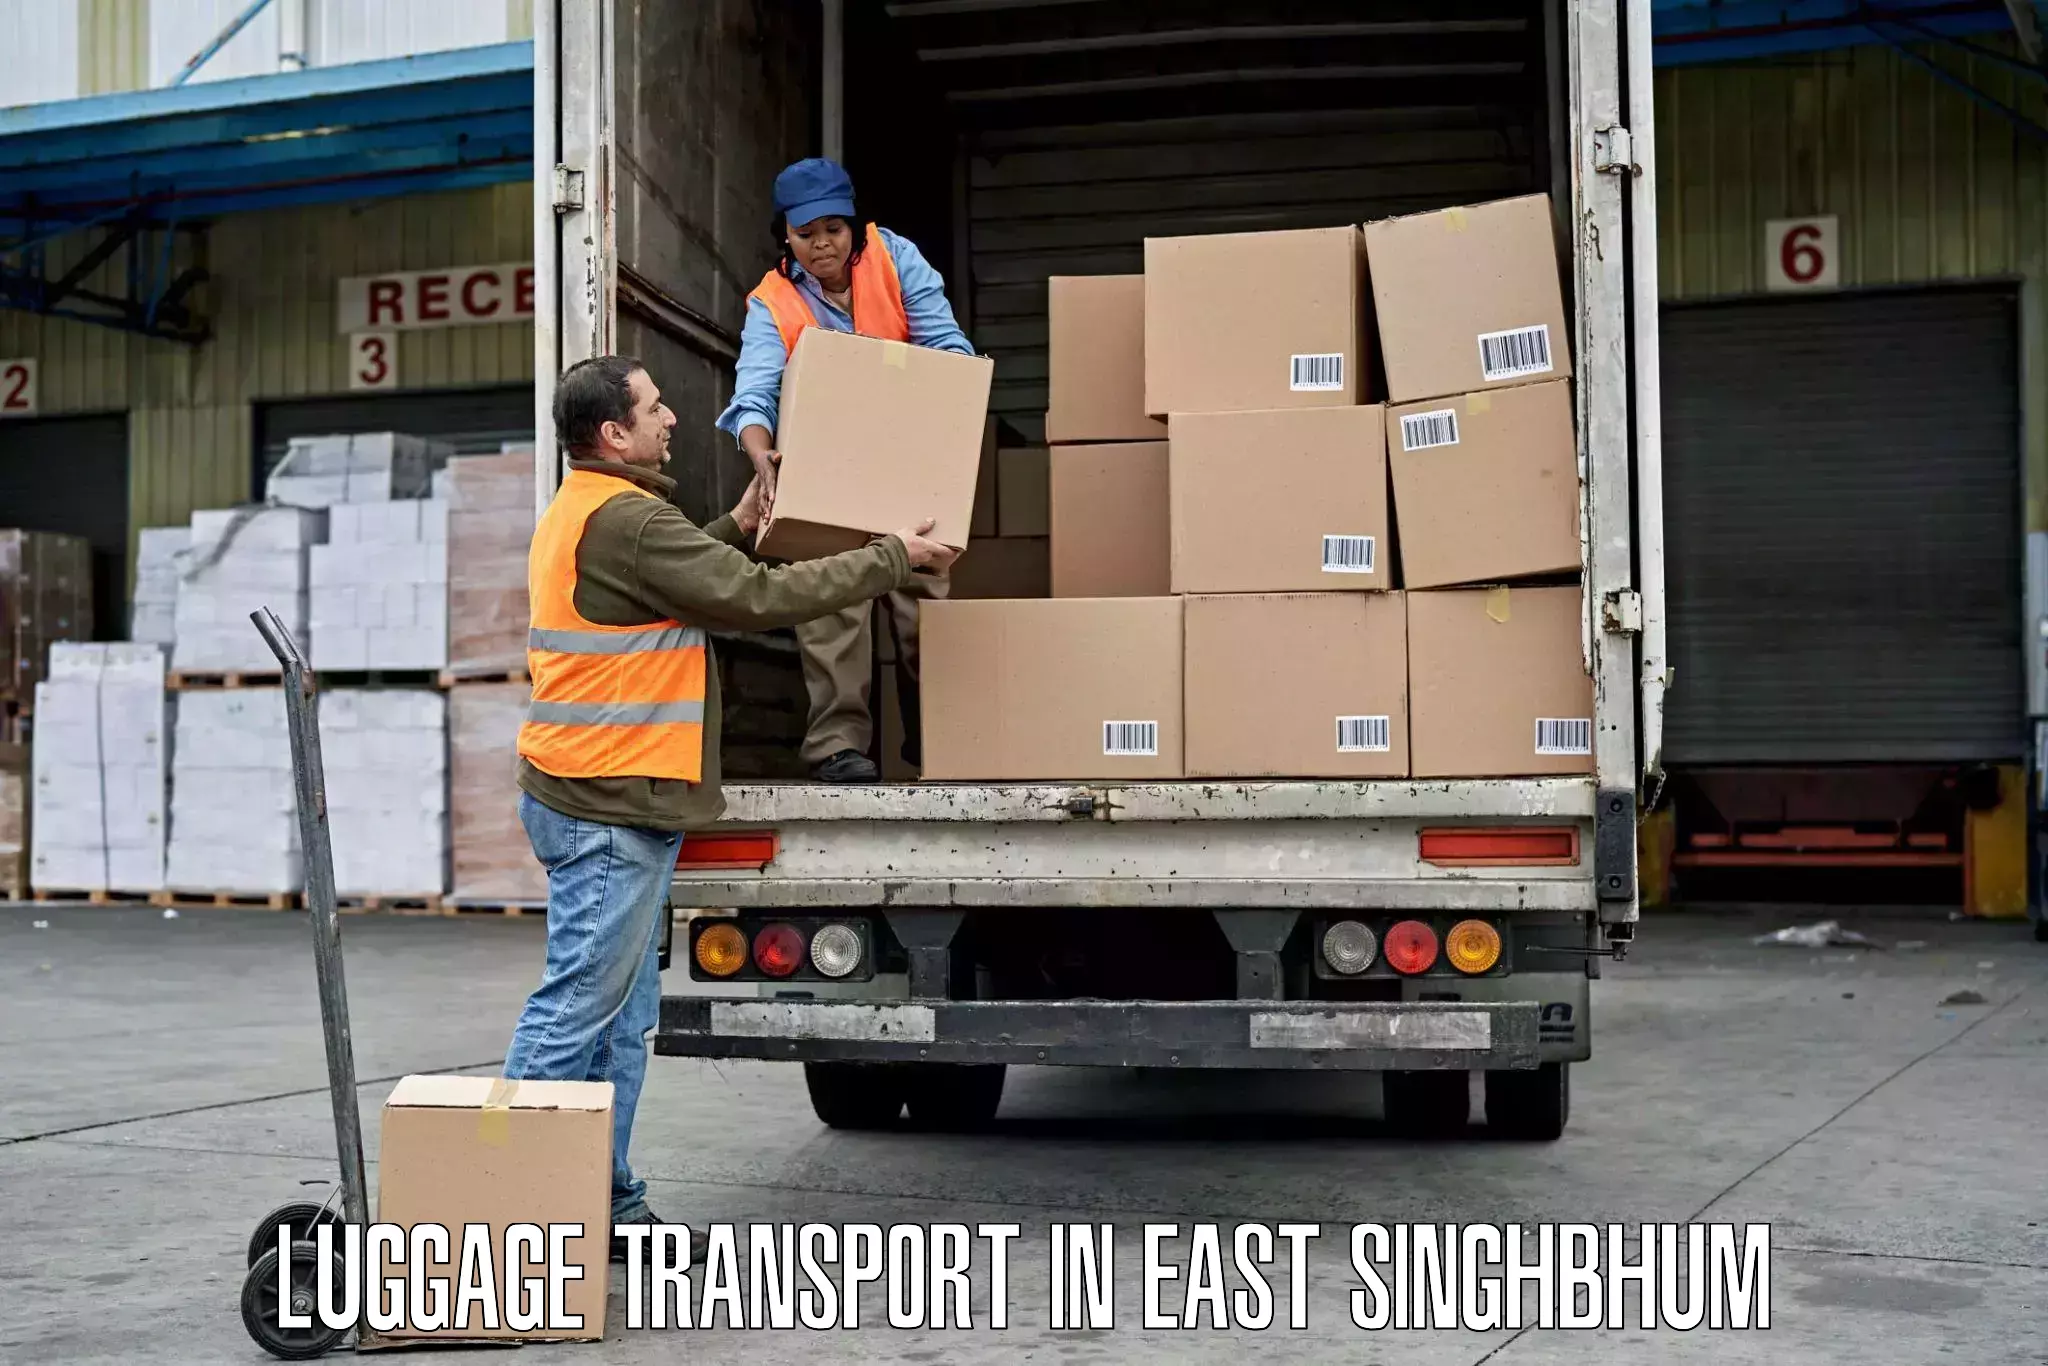 Luggage shipment specialists in East Singhbhum